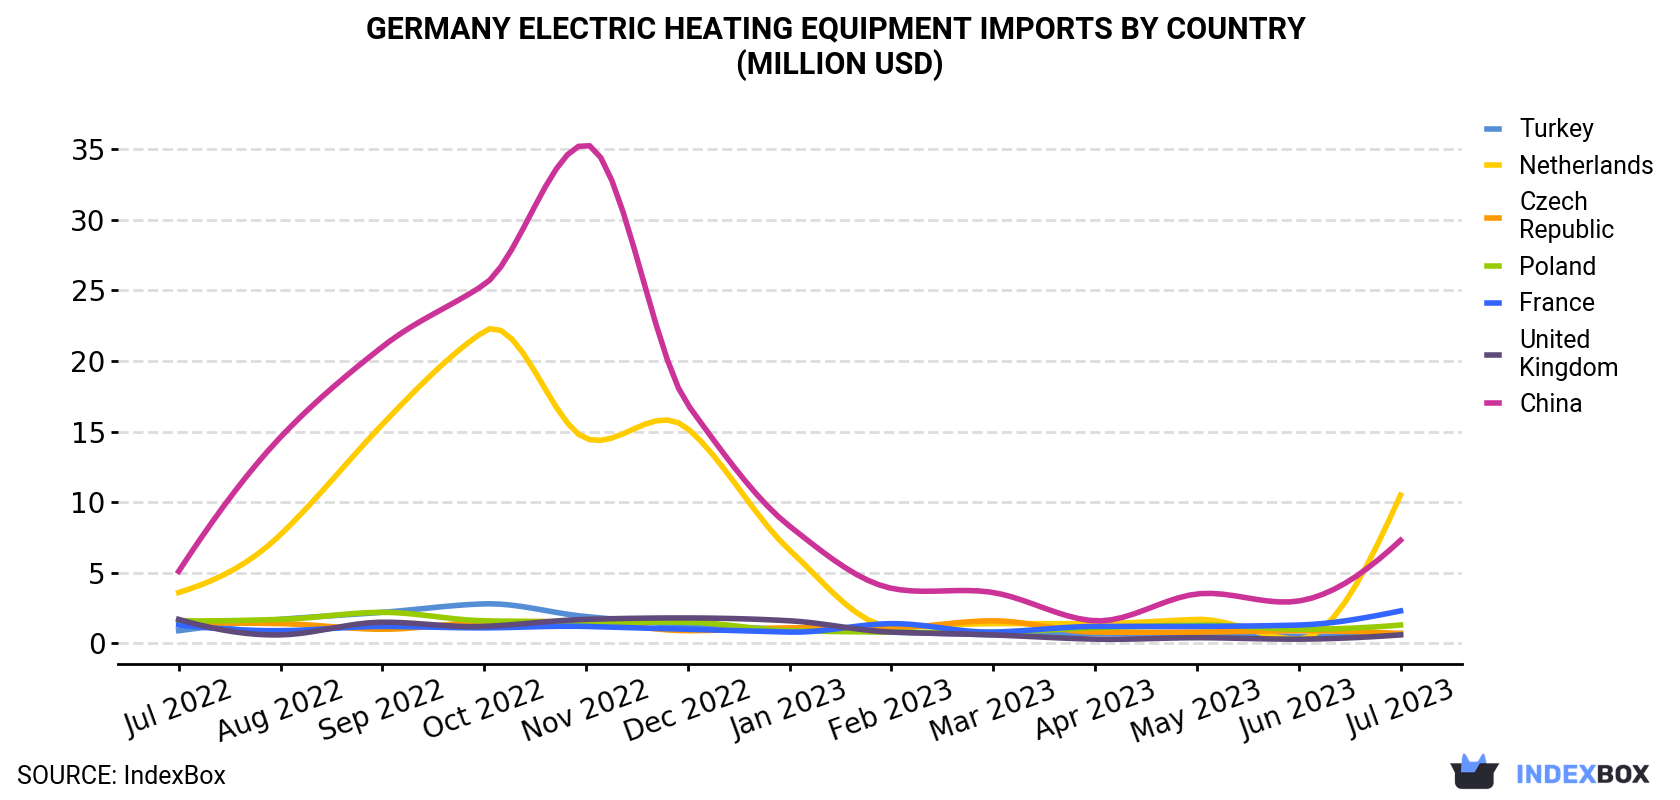 Germany Electric Heating Equipment Imports By Country (Million USD)